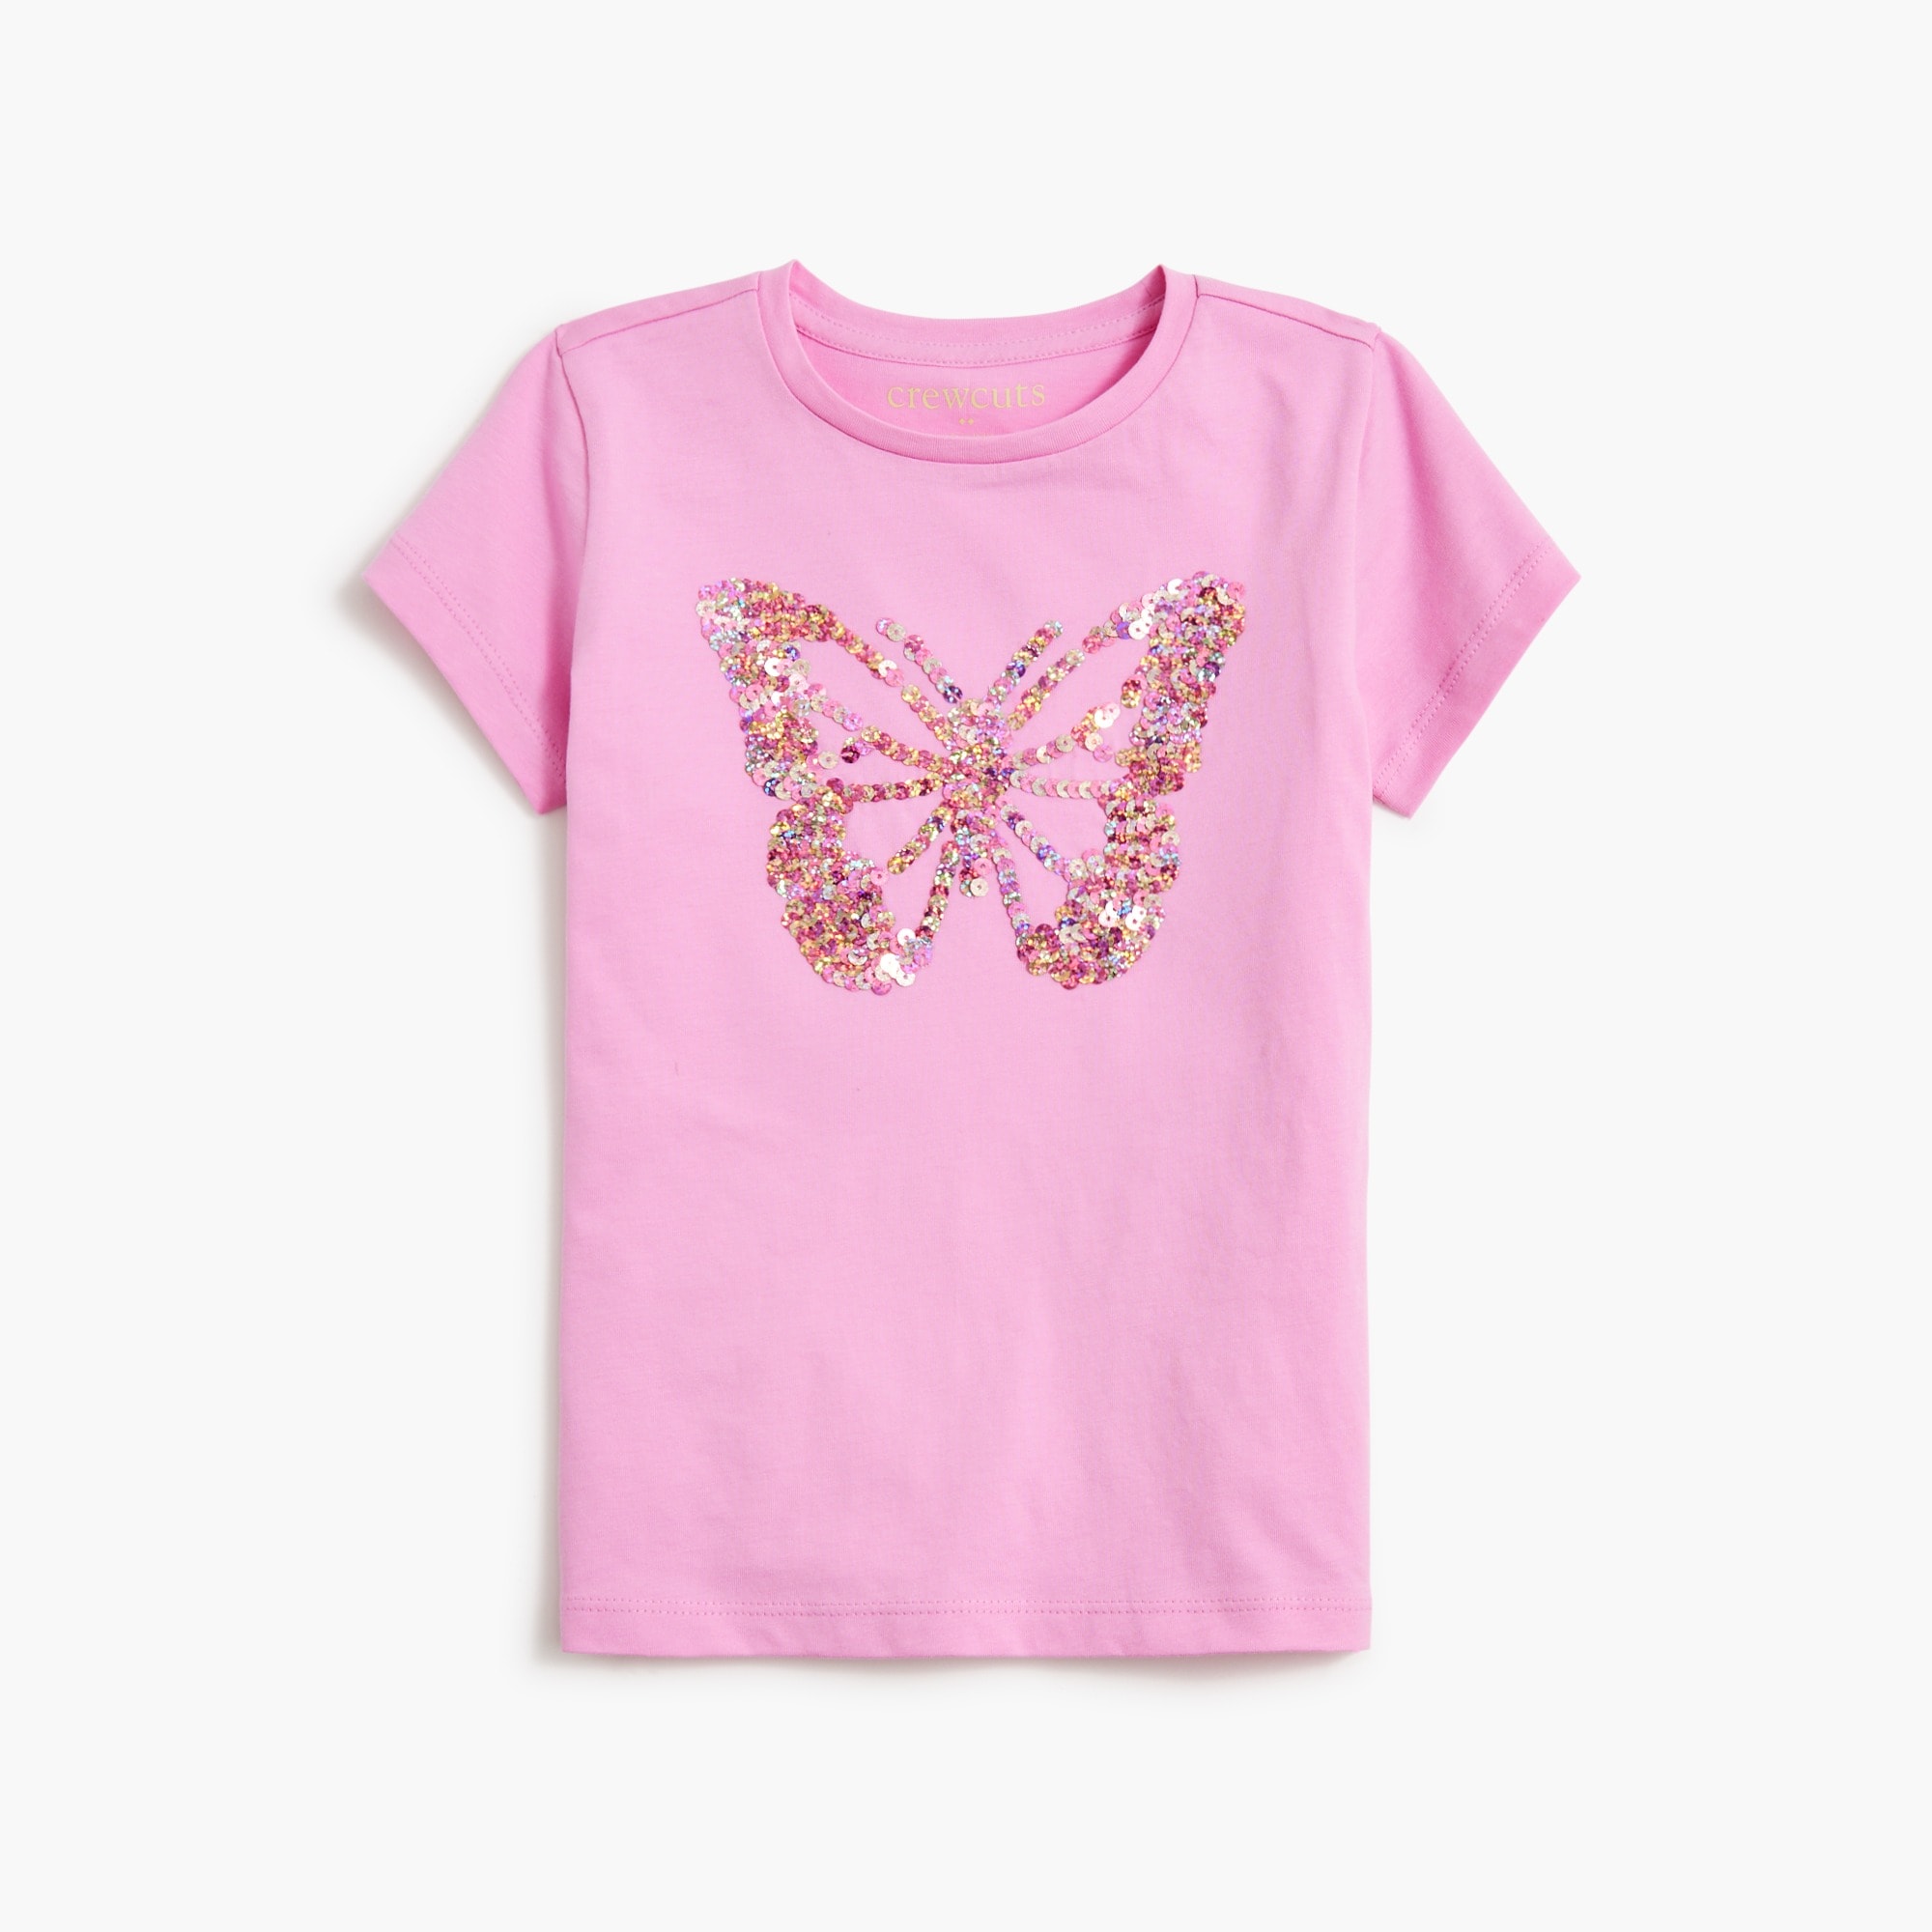 Girls' sequin butterfly graphic tee